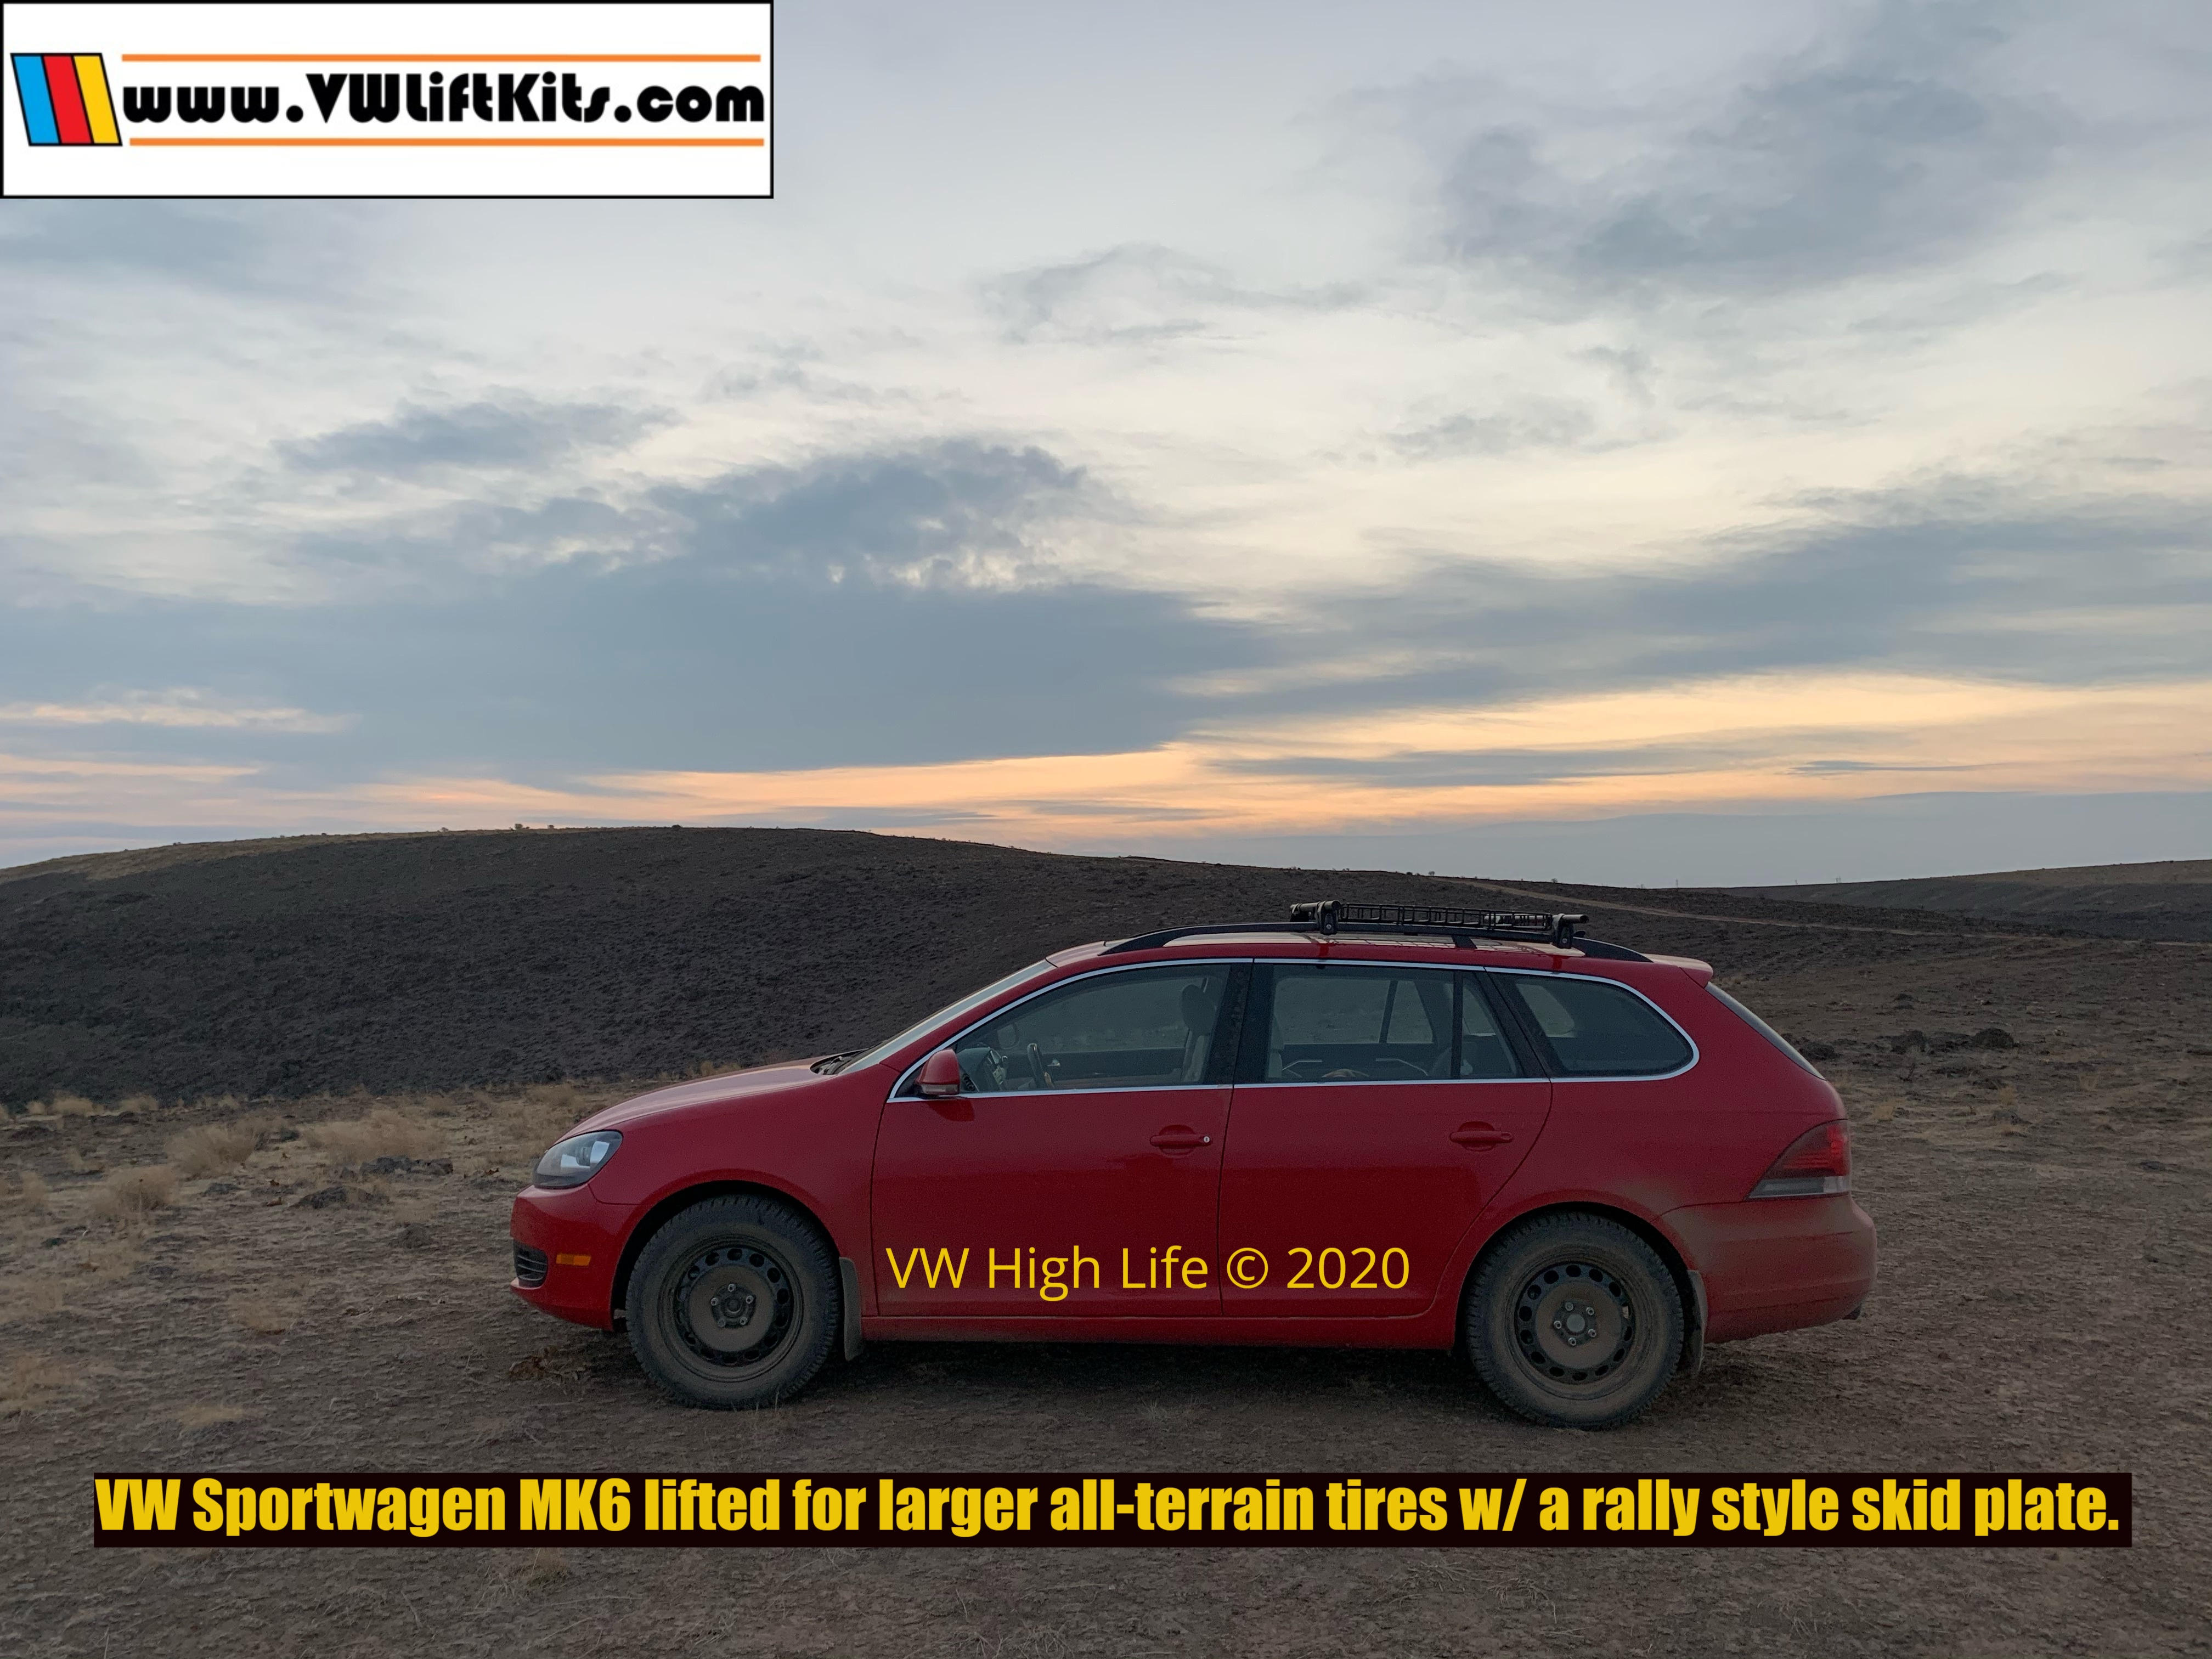 2013 VW Sportwagen MK6 lifted for larger all-terrain tires and a rally style skid plate.